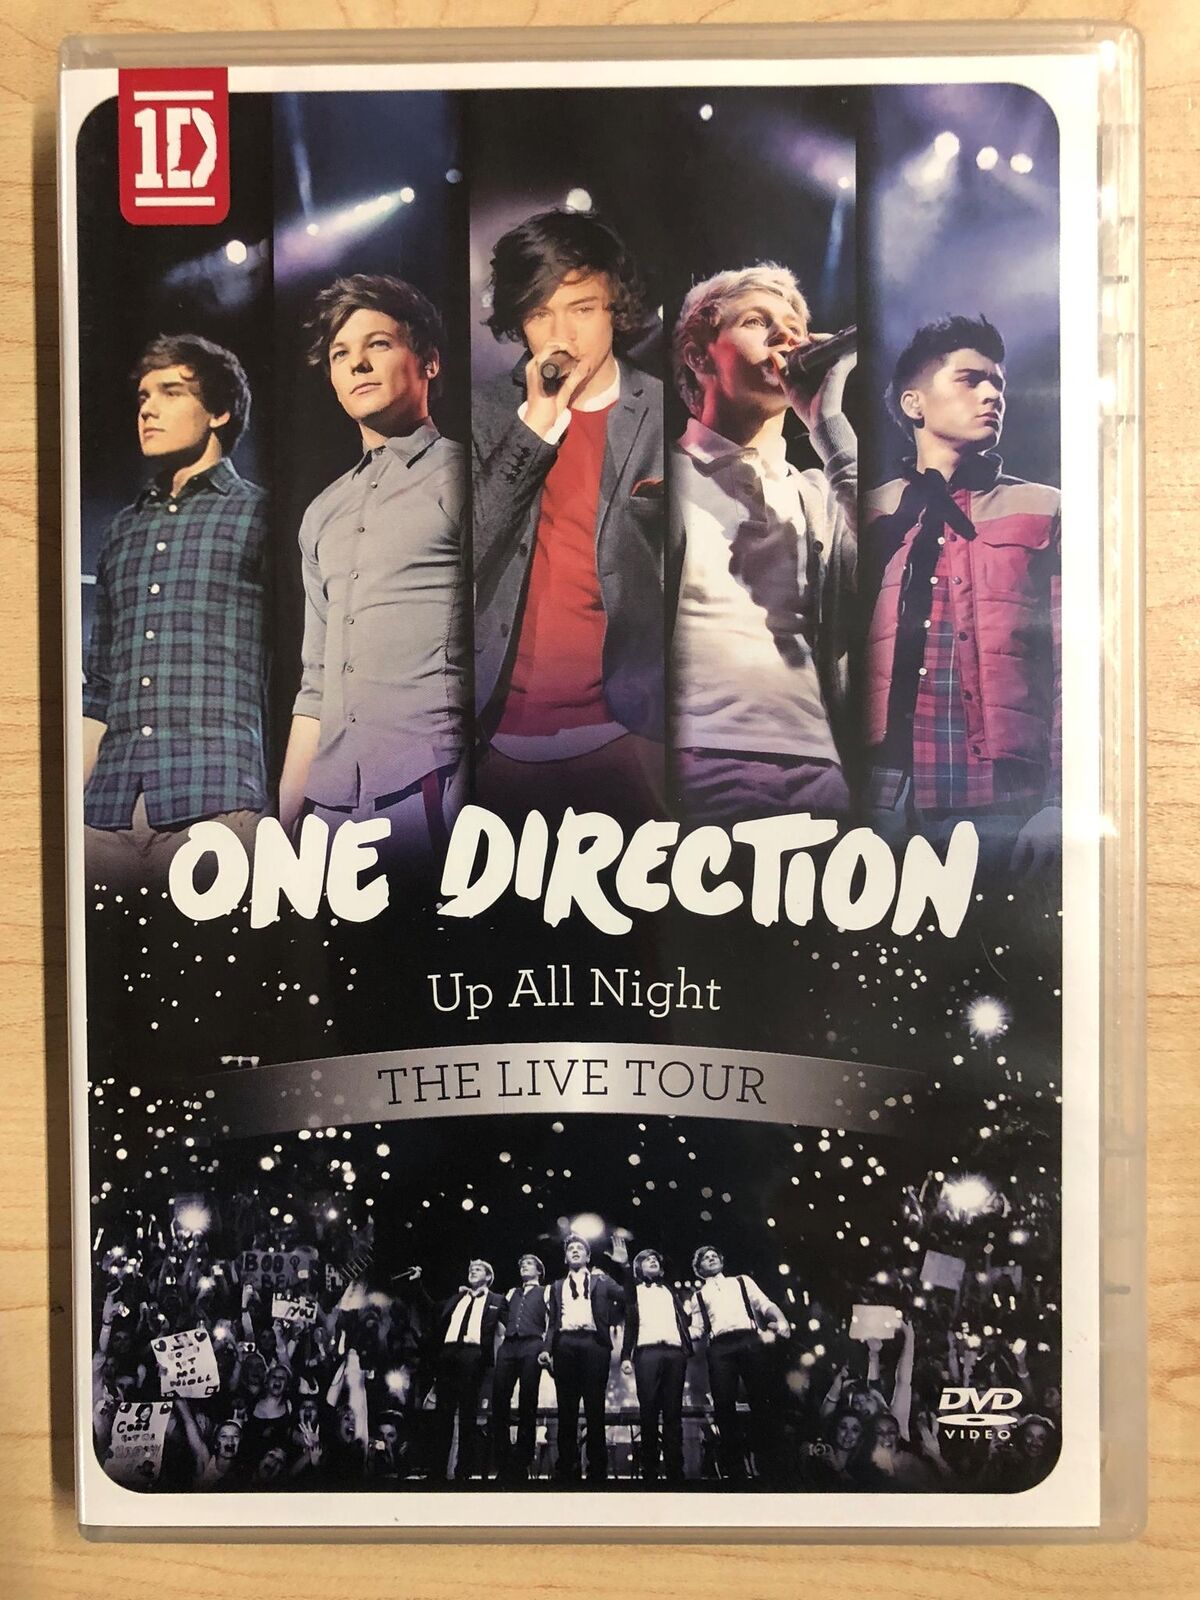 One Direction - Up All Night - The Live Tour (DVD, 2012) - J1231